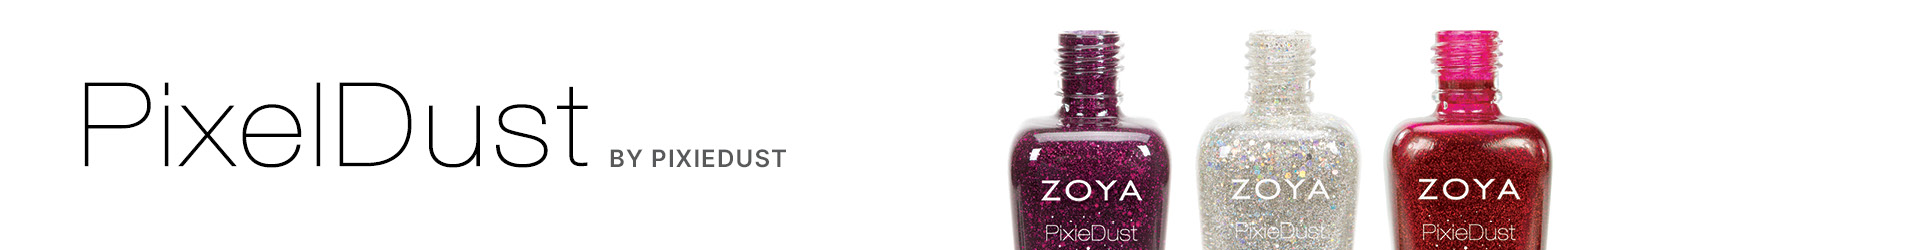 pixeldust by pixiedust three colors - purple, silver, and red textured polish